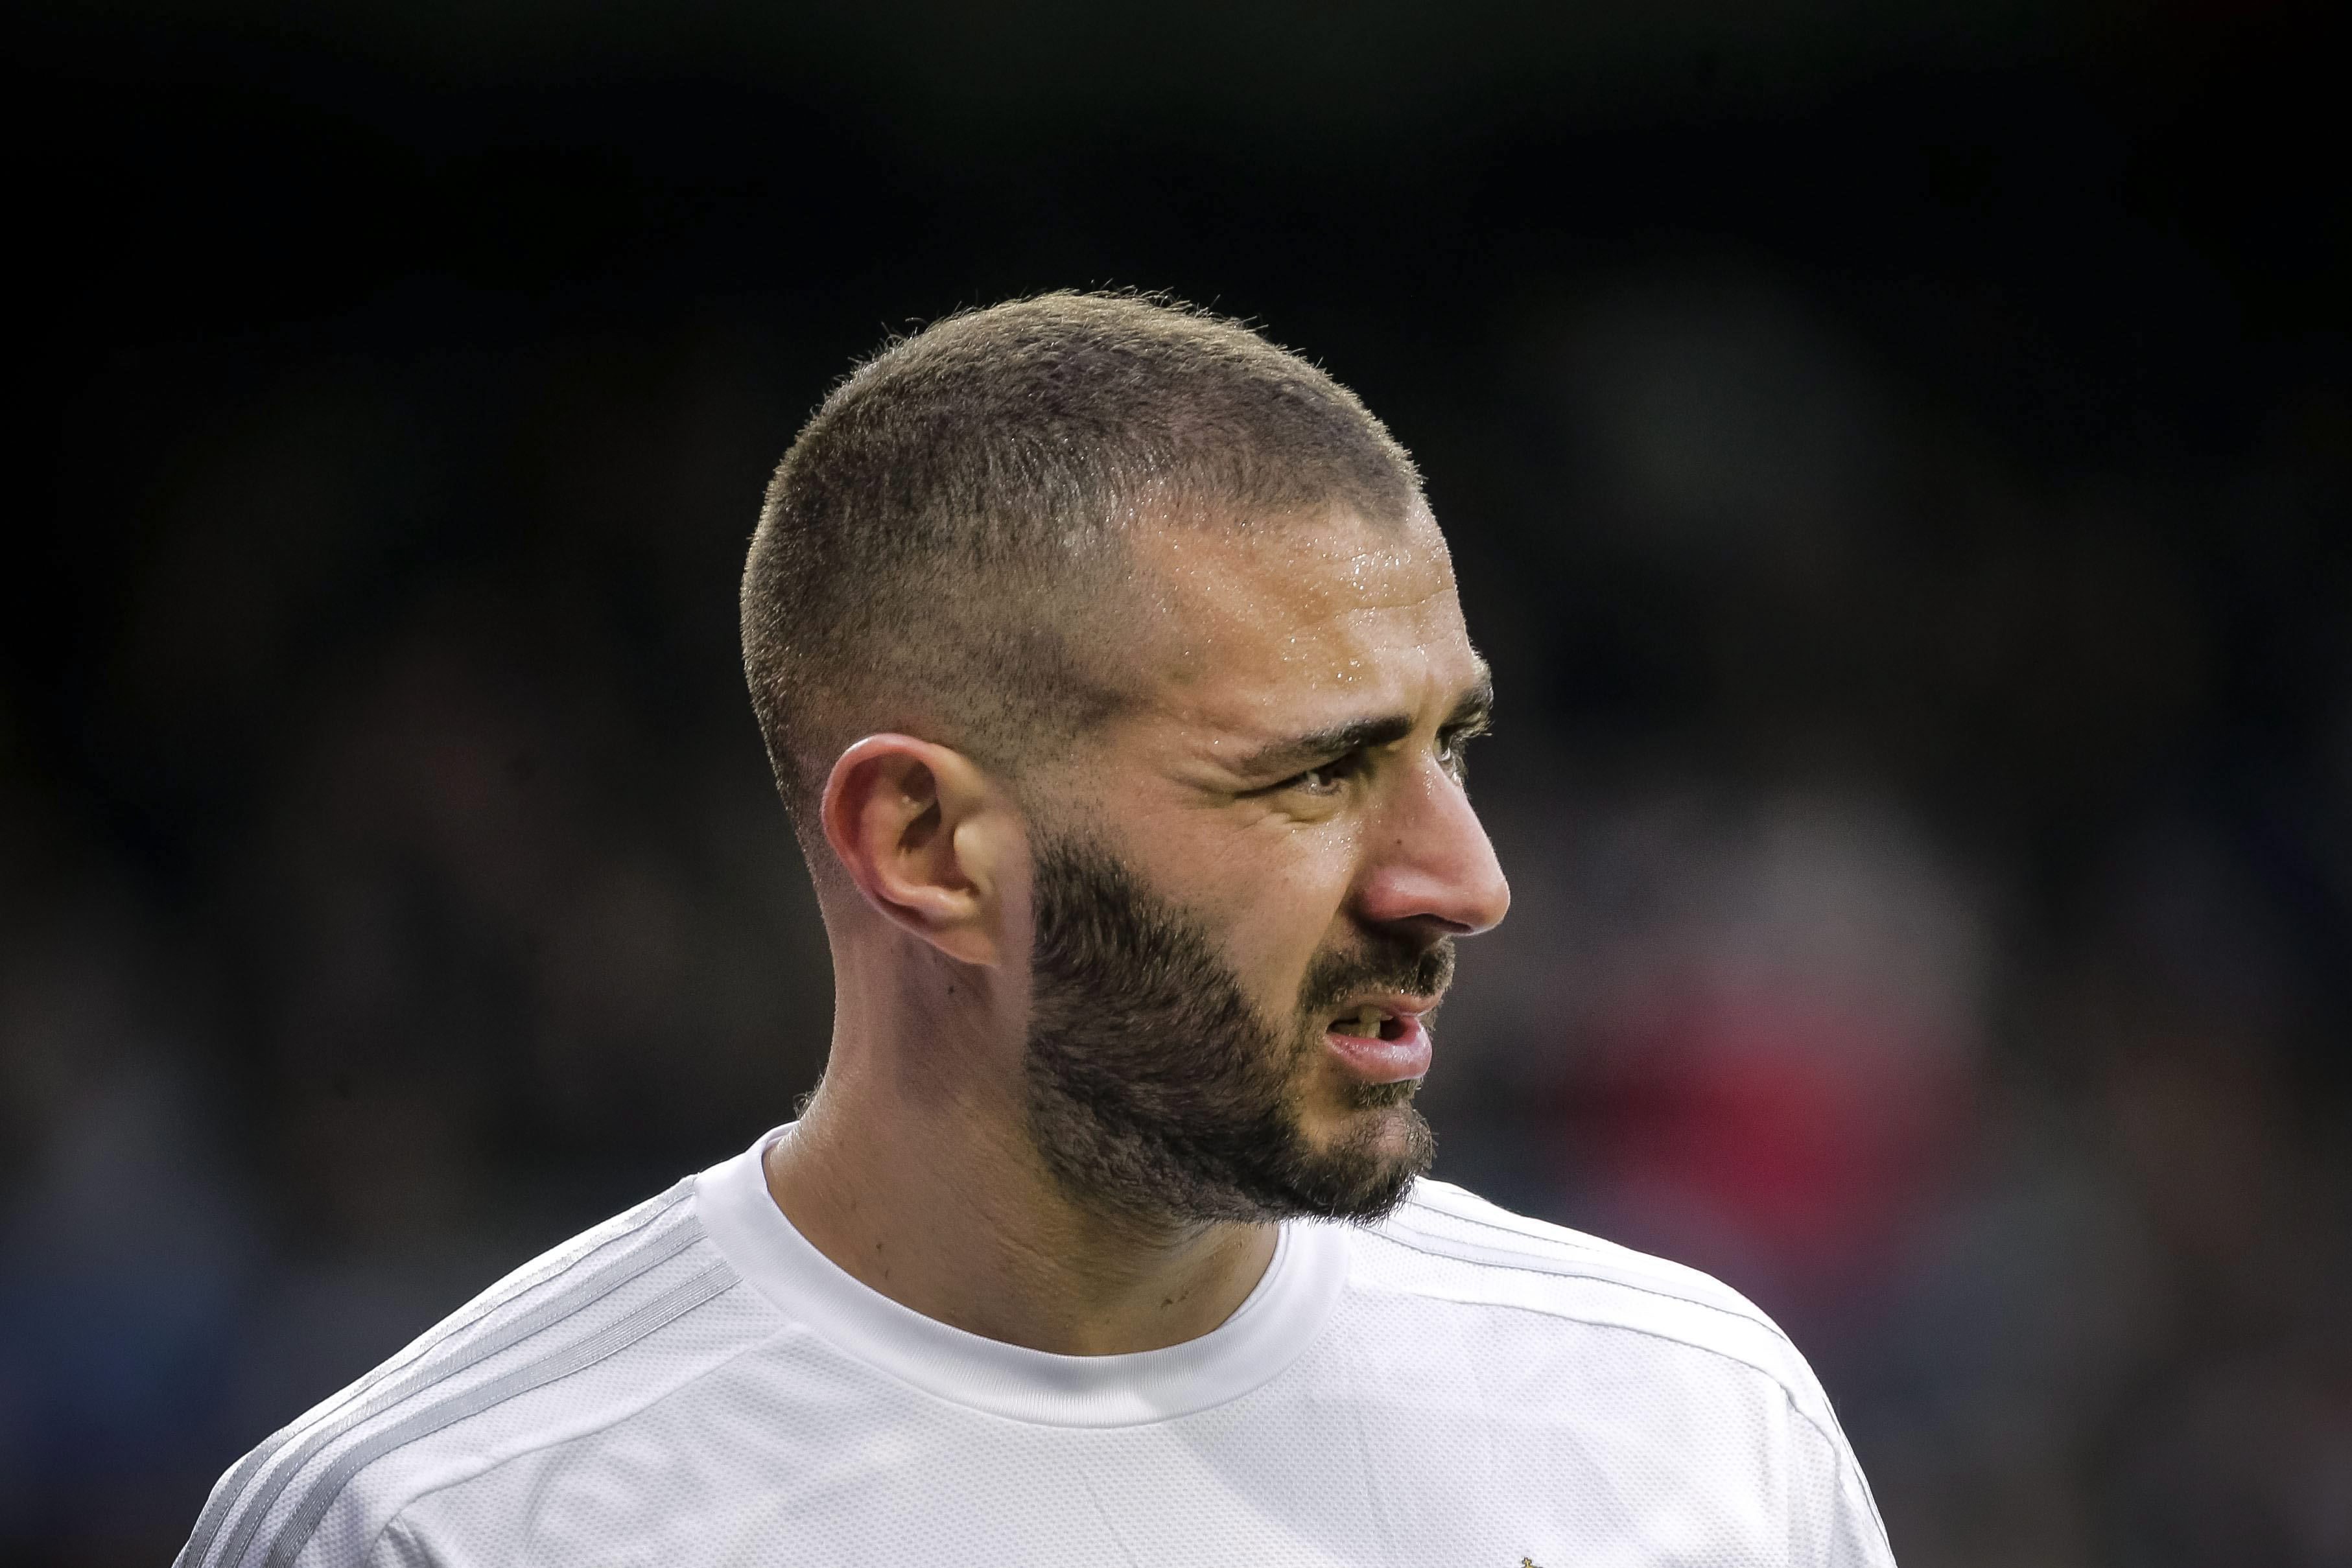 epa05107158 Real Madrid's French striker Karim Benzema leaves the field after being injured during the Spanish Primera Division soccer match played against Sporting Gijon at Santiago Bernabeu stadium in Madrid, Spain, 17 January 2016.  EPA/Emilio Naranjo